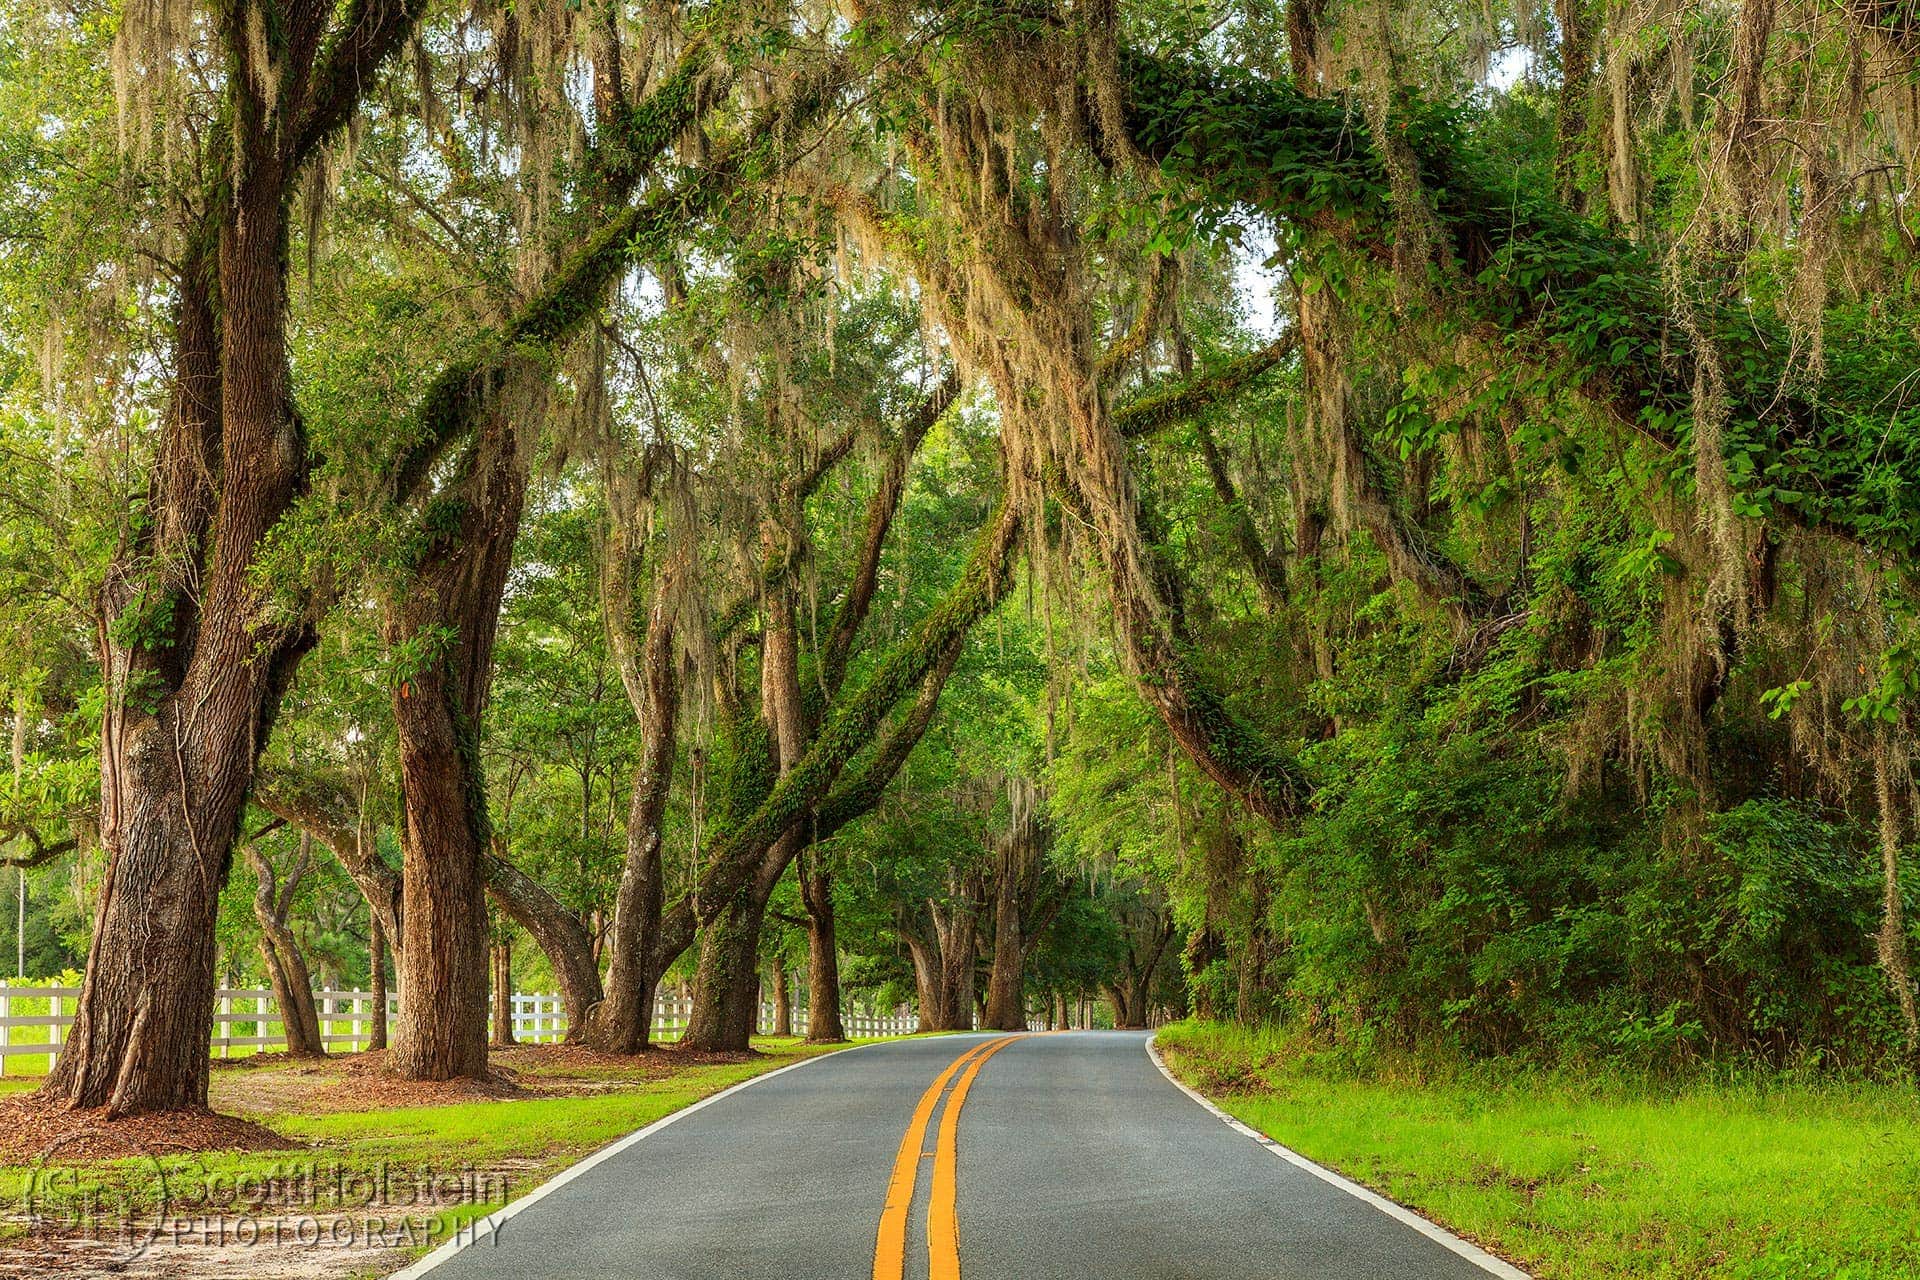 Large southern live oak trees draped in Spanish moss create a canopy over Miccosukee Road, one of the Tallahassee canopy roads.